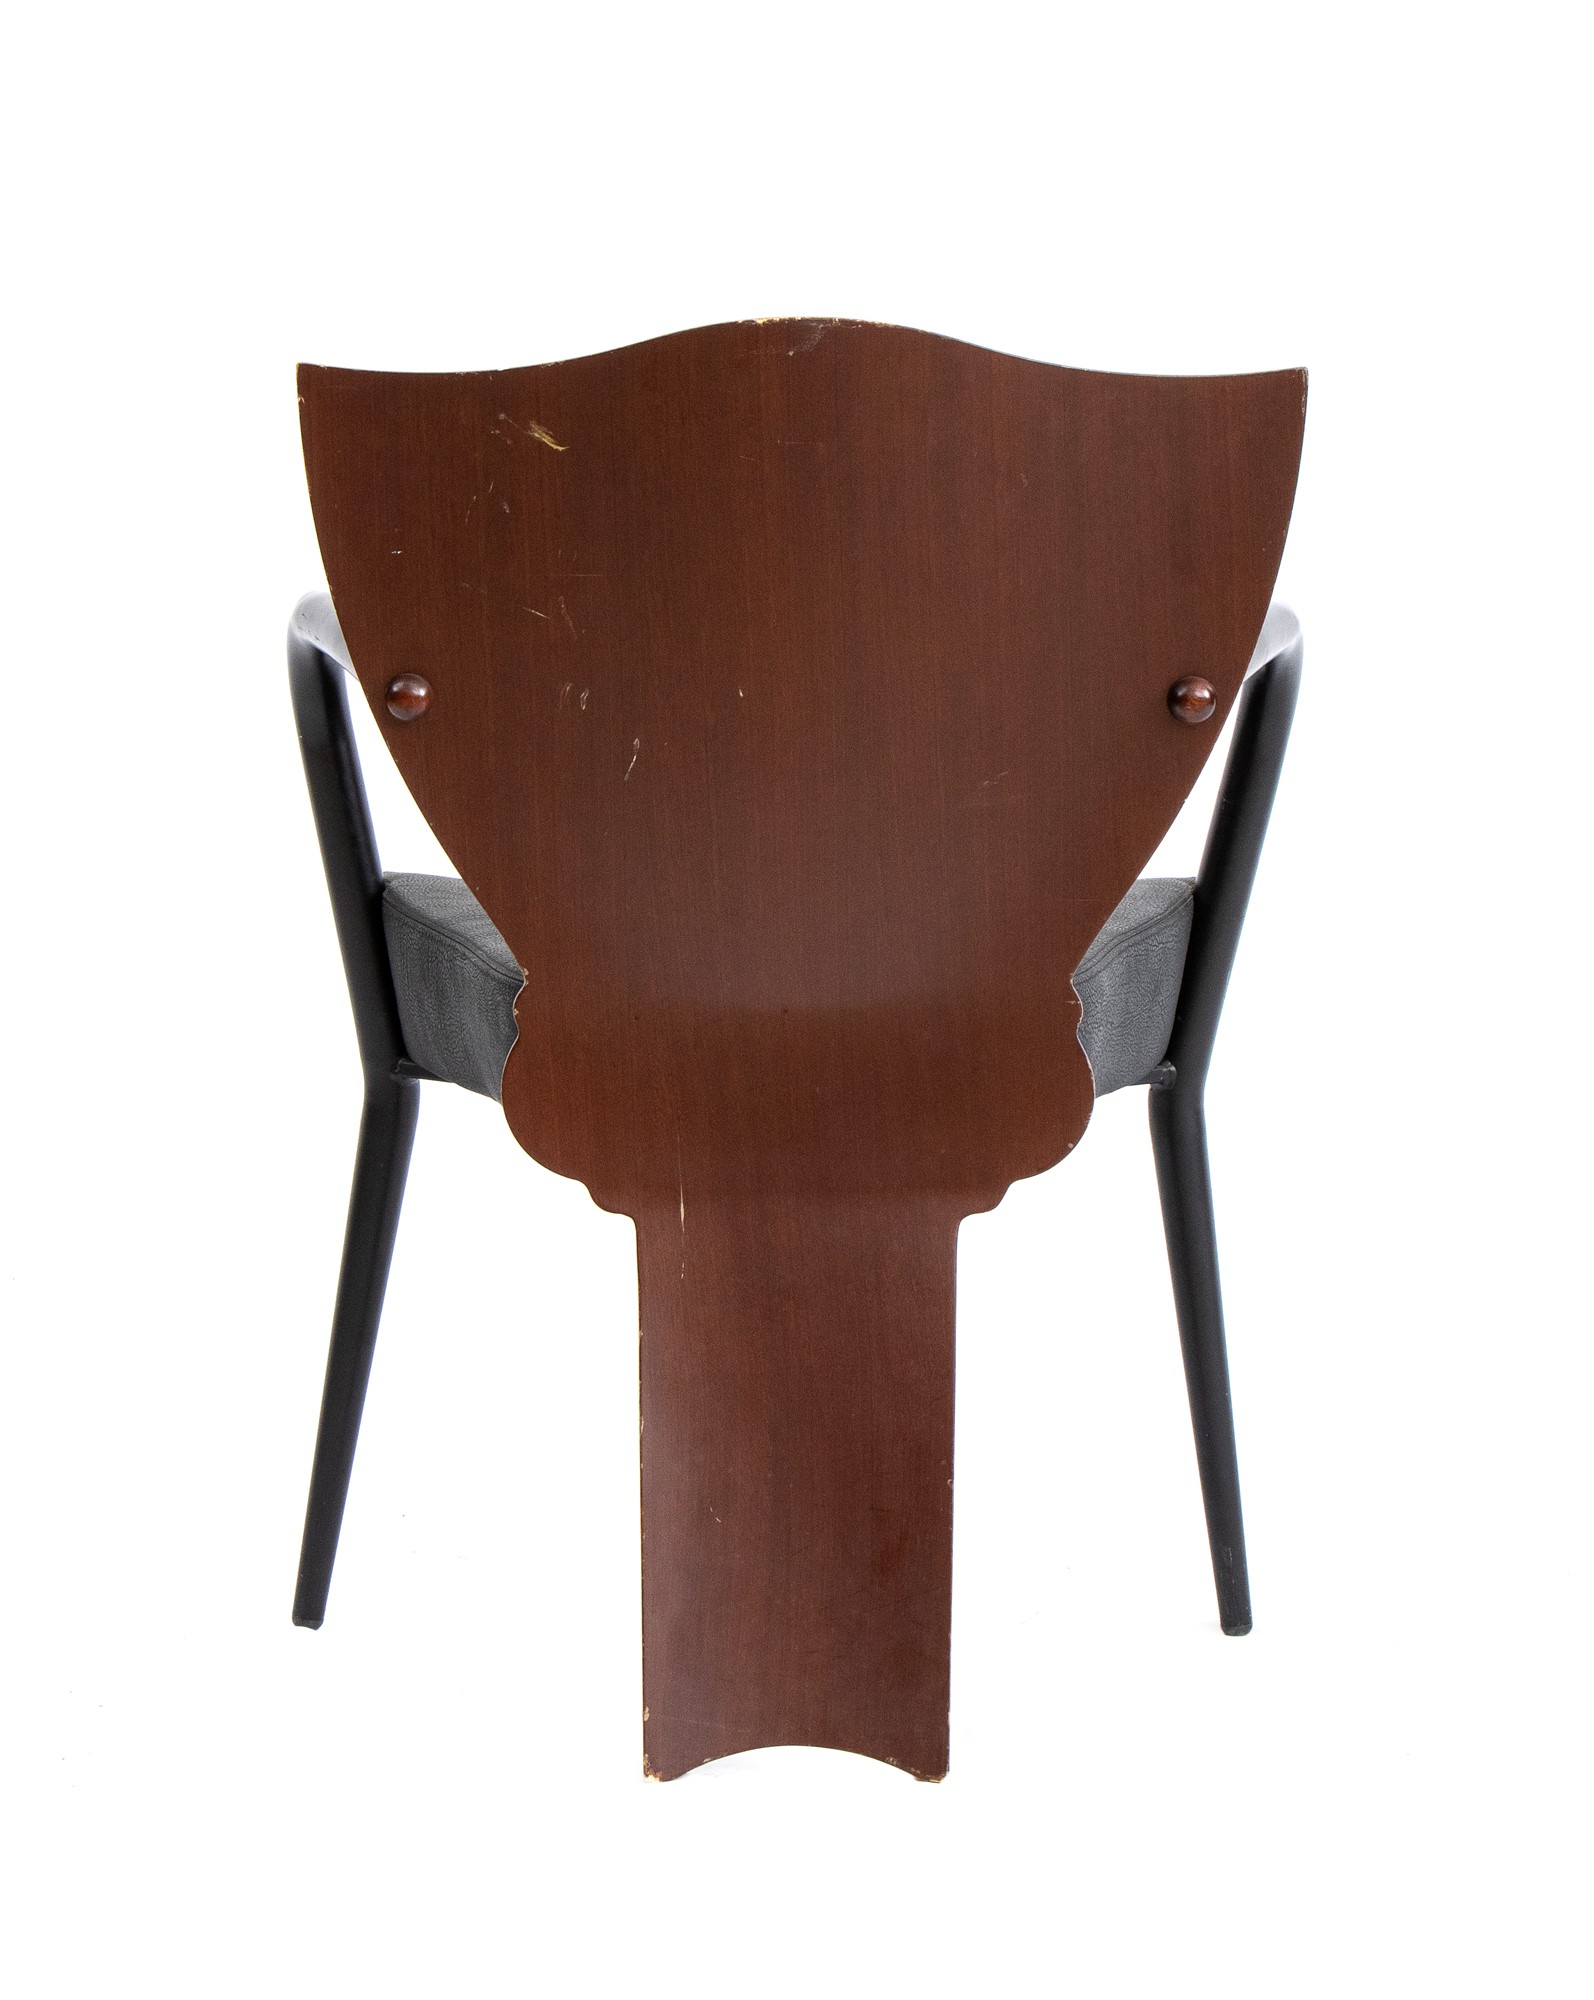 Four chairs mod. Dalami - Image 8 of 15